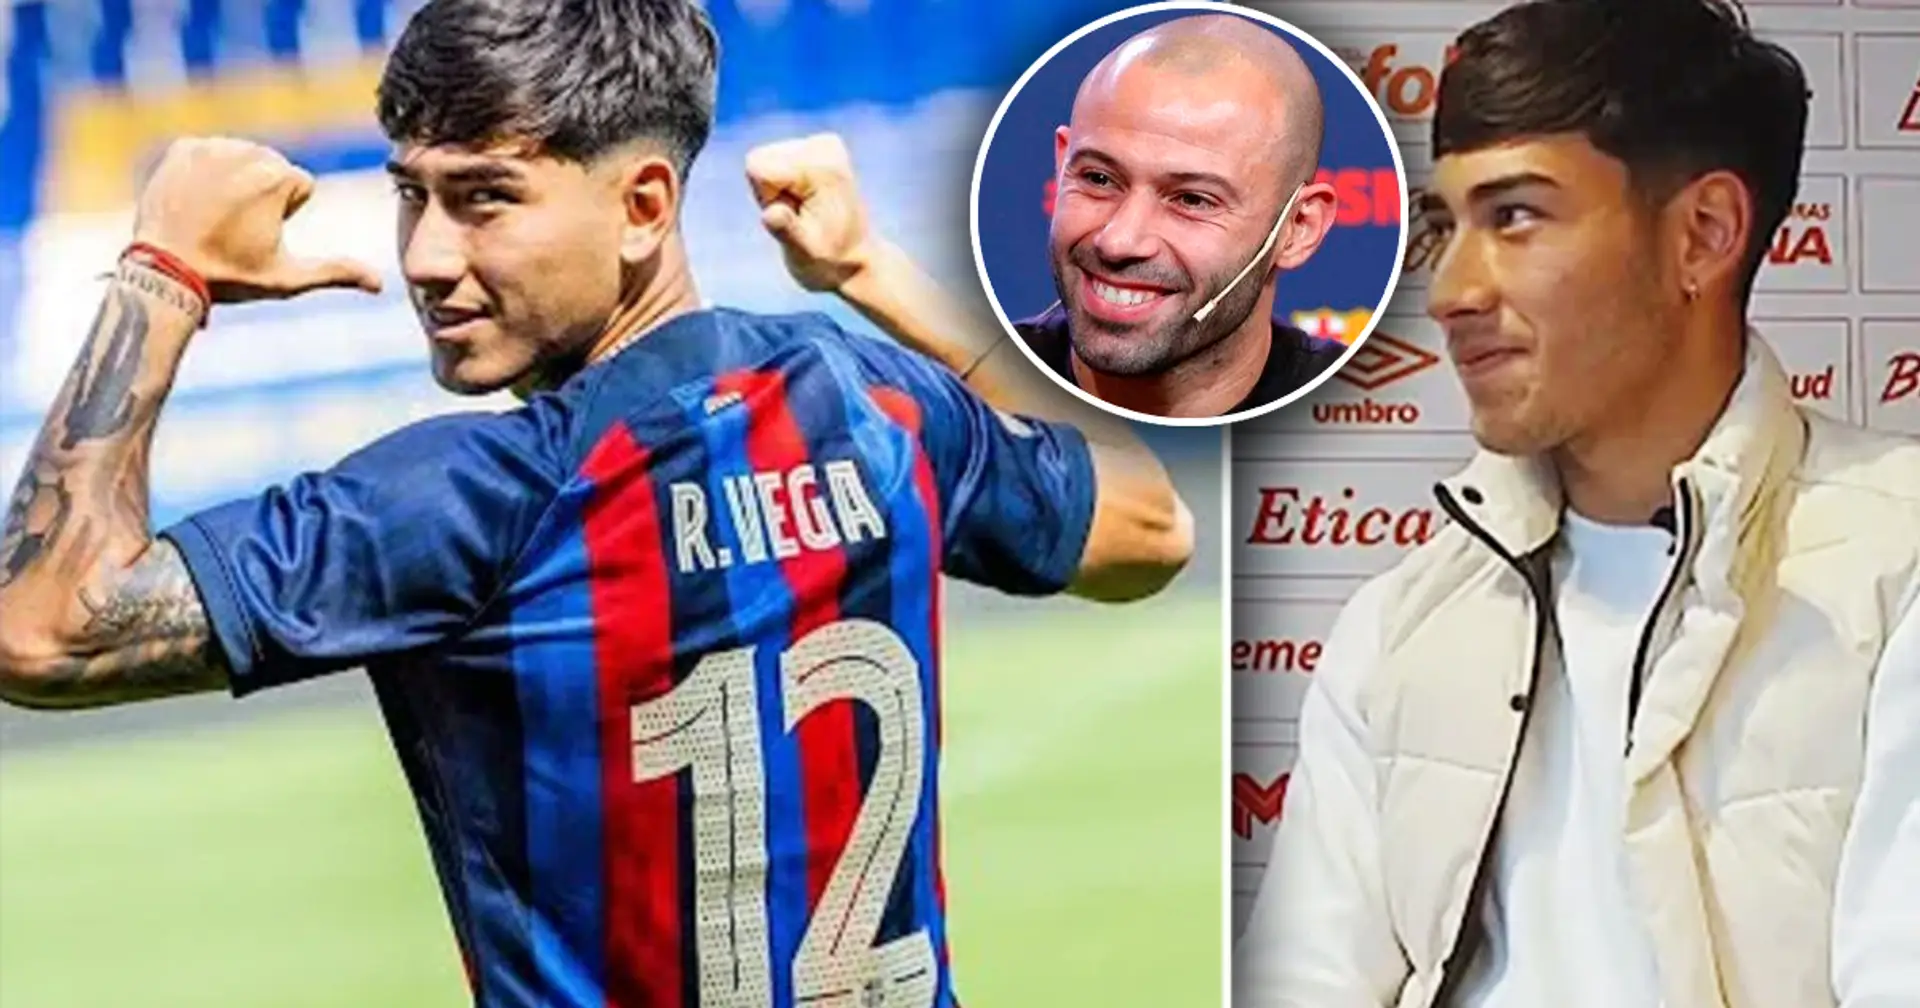 Coached by Mascherano, called up to Barca's senior team: Who is 18-year-old Roman Vega